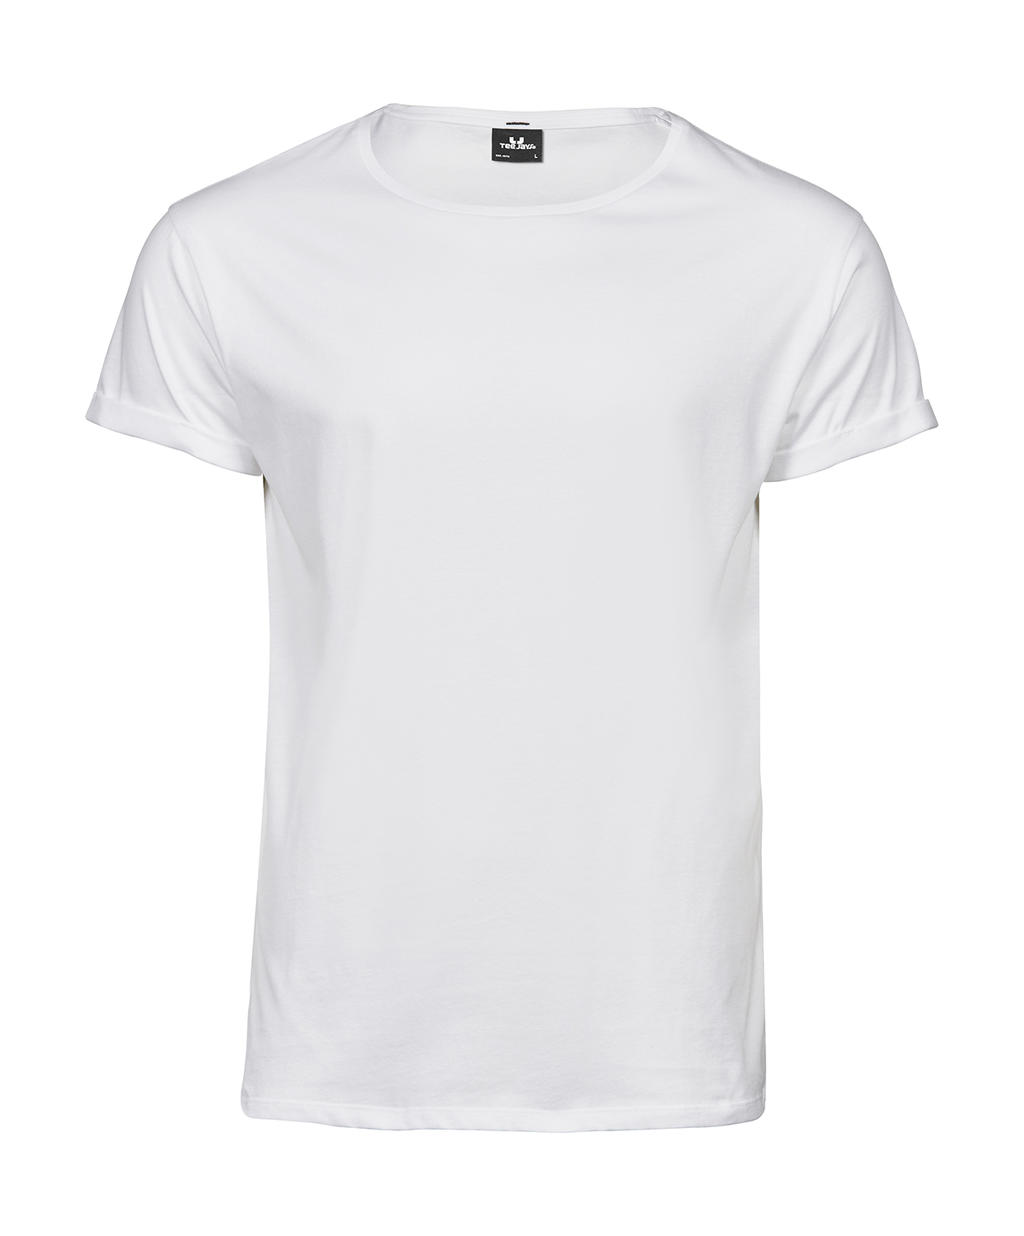  Roll-Up Tee in Farbe White